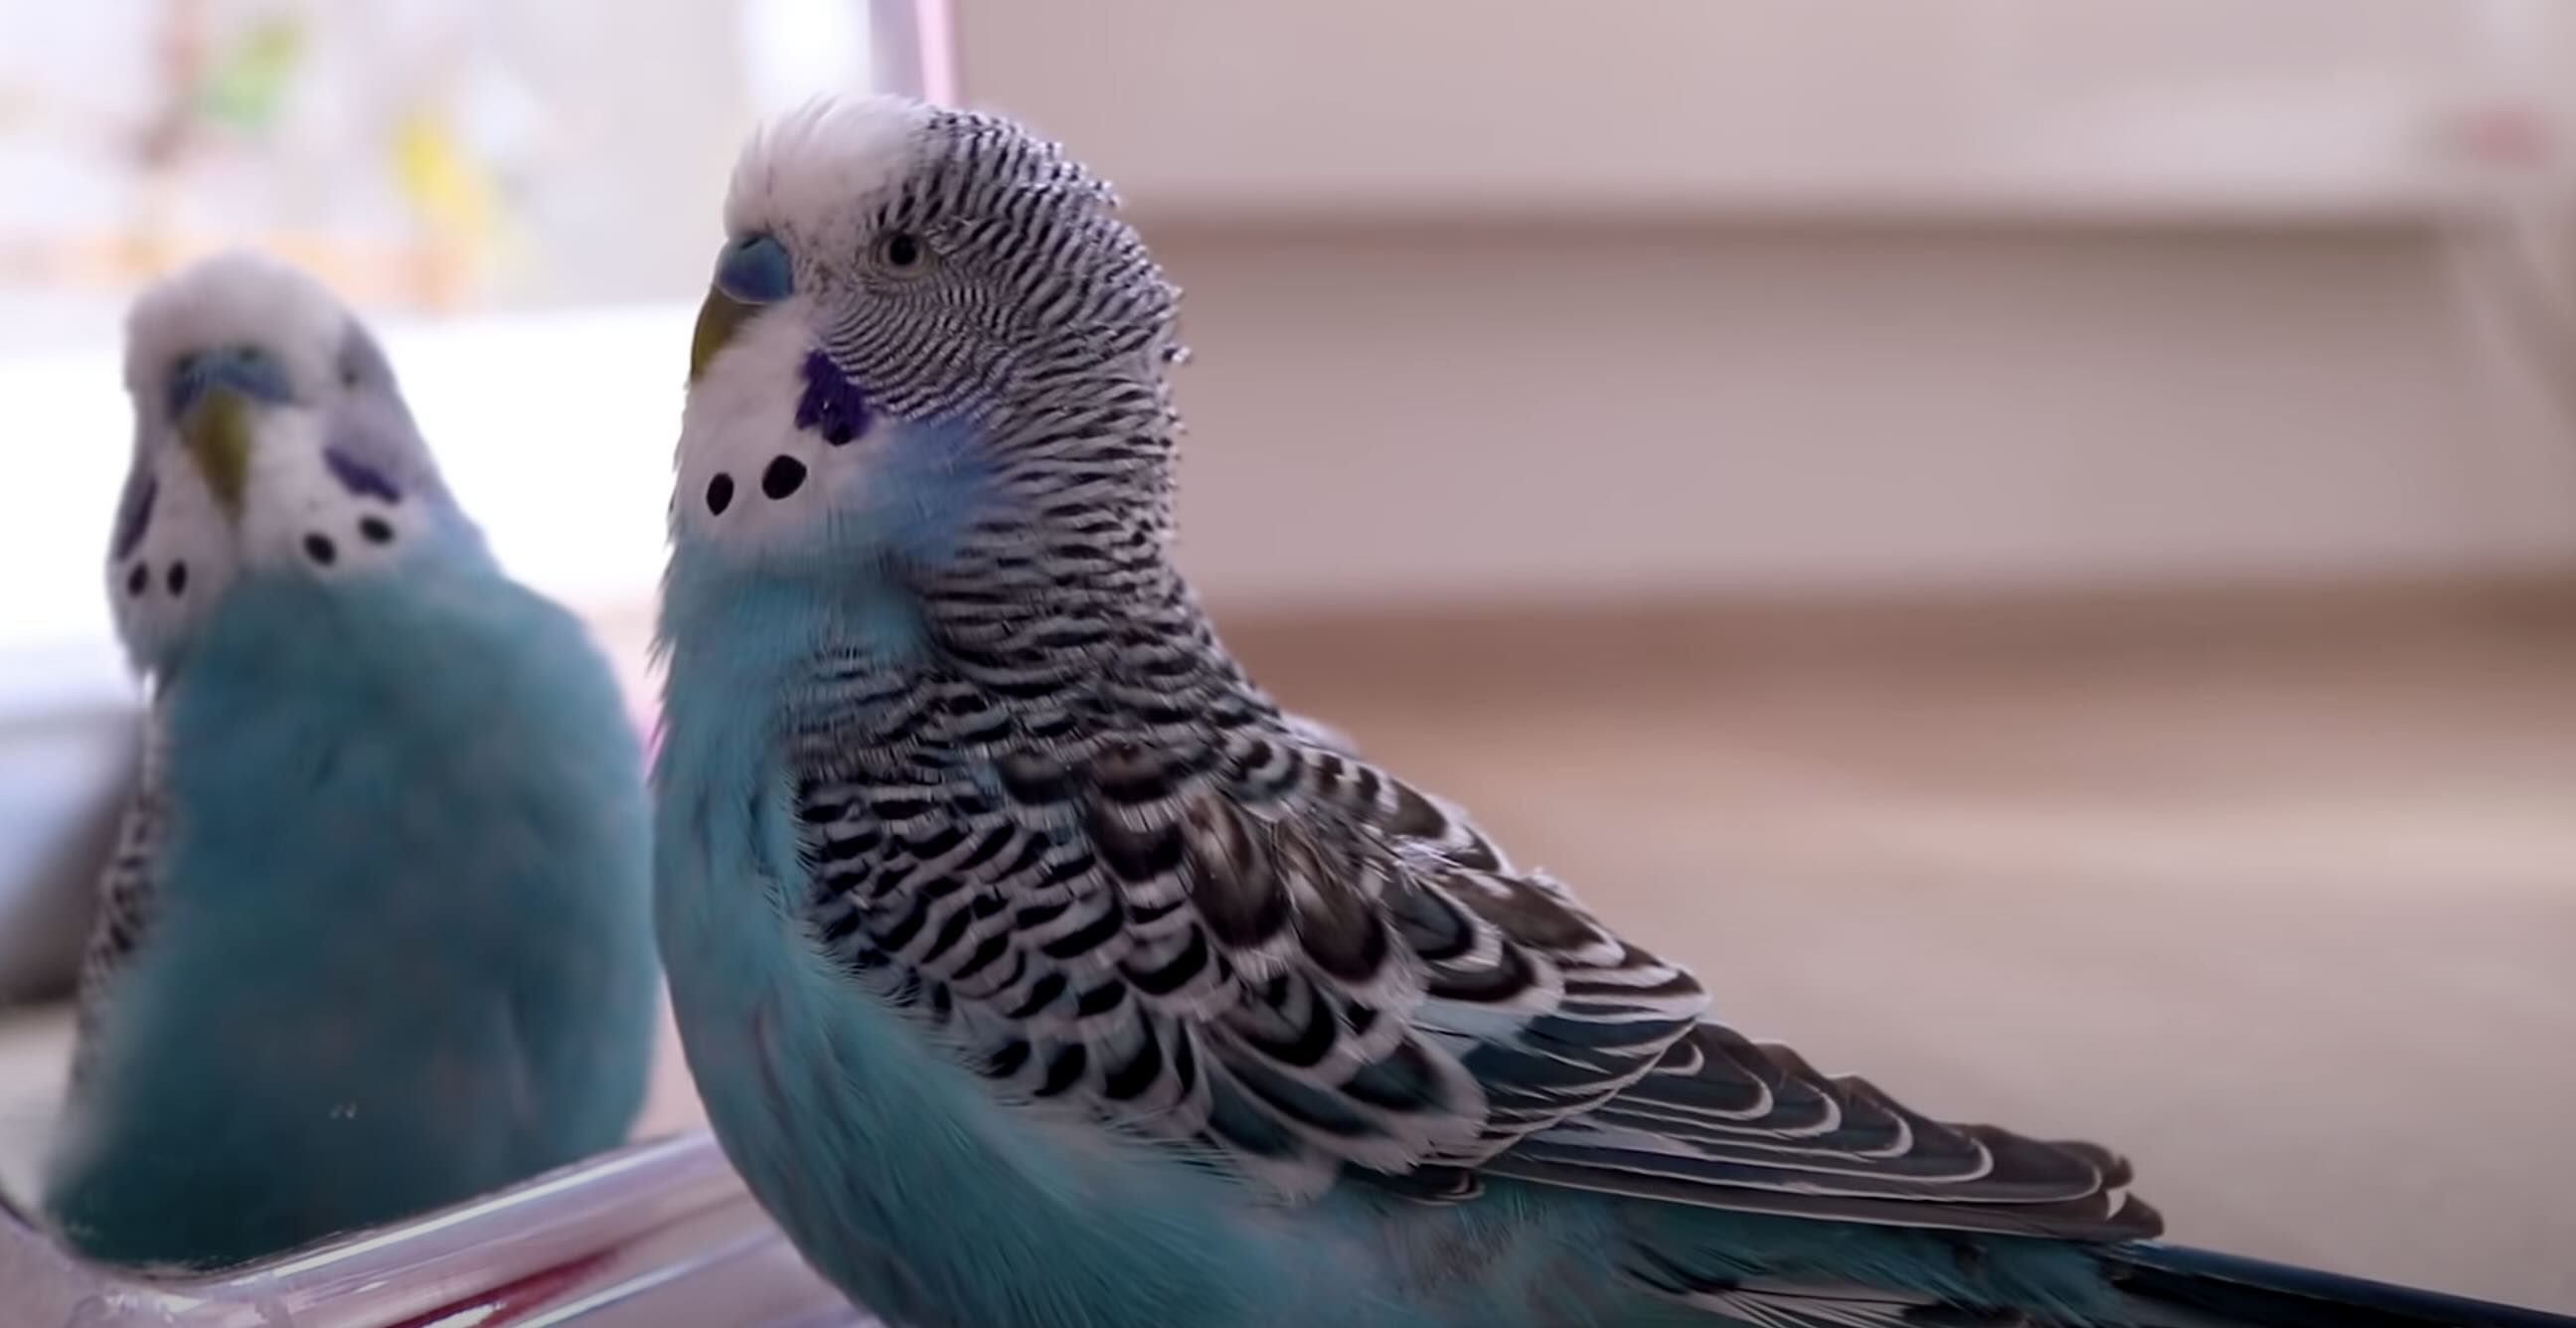 Why Are Mirrors Bad For Budgies